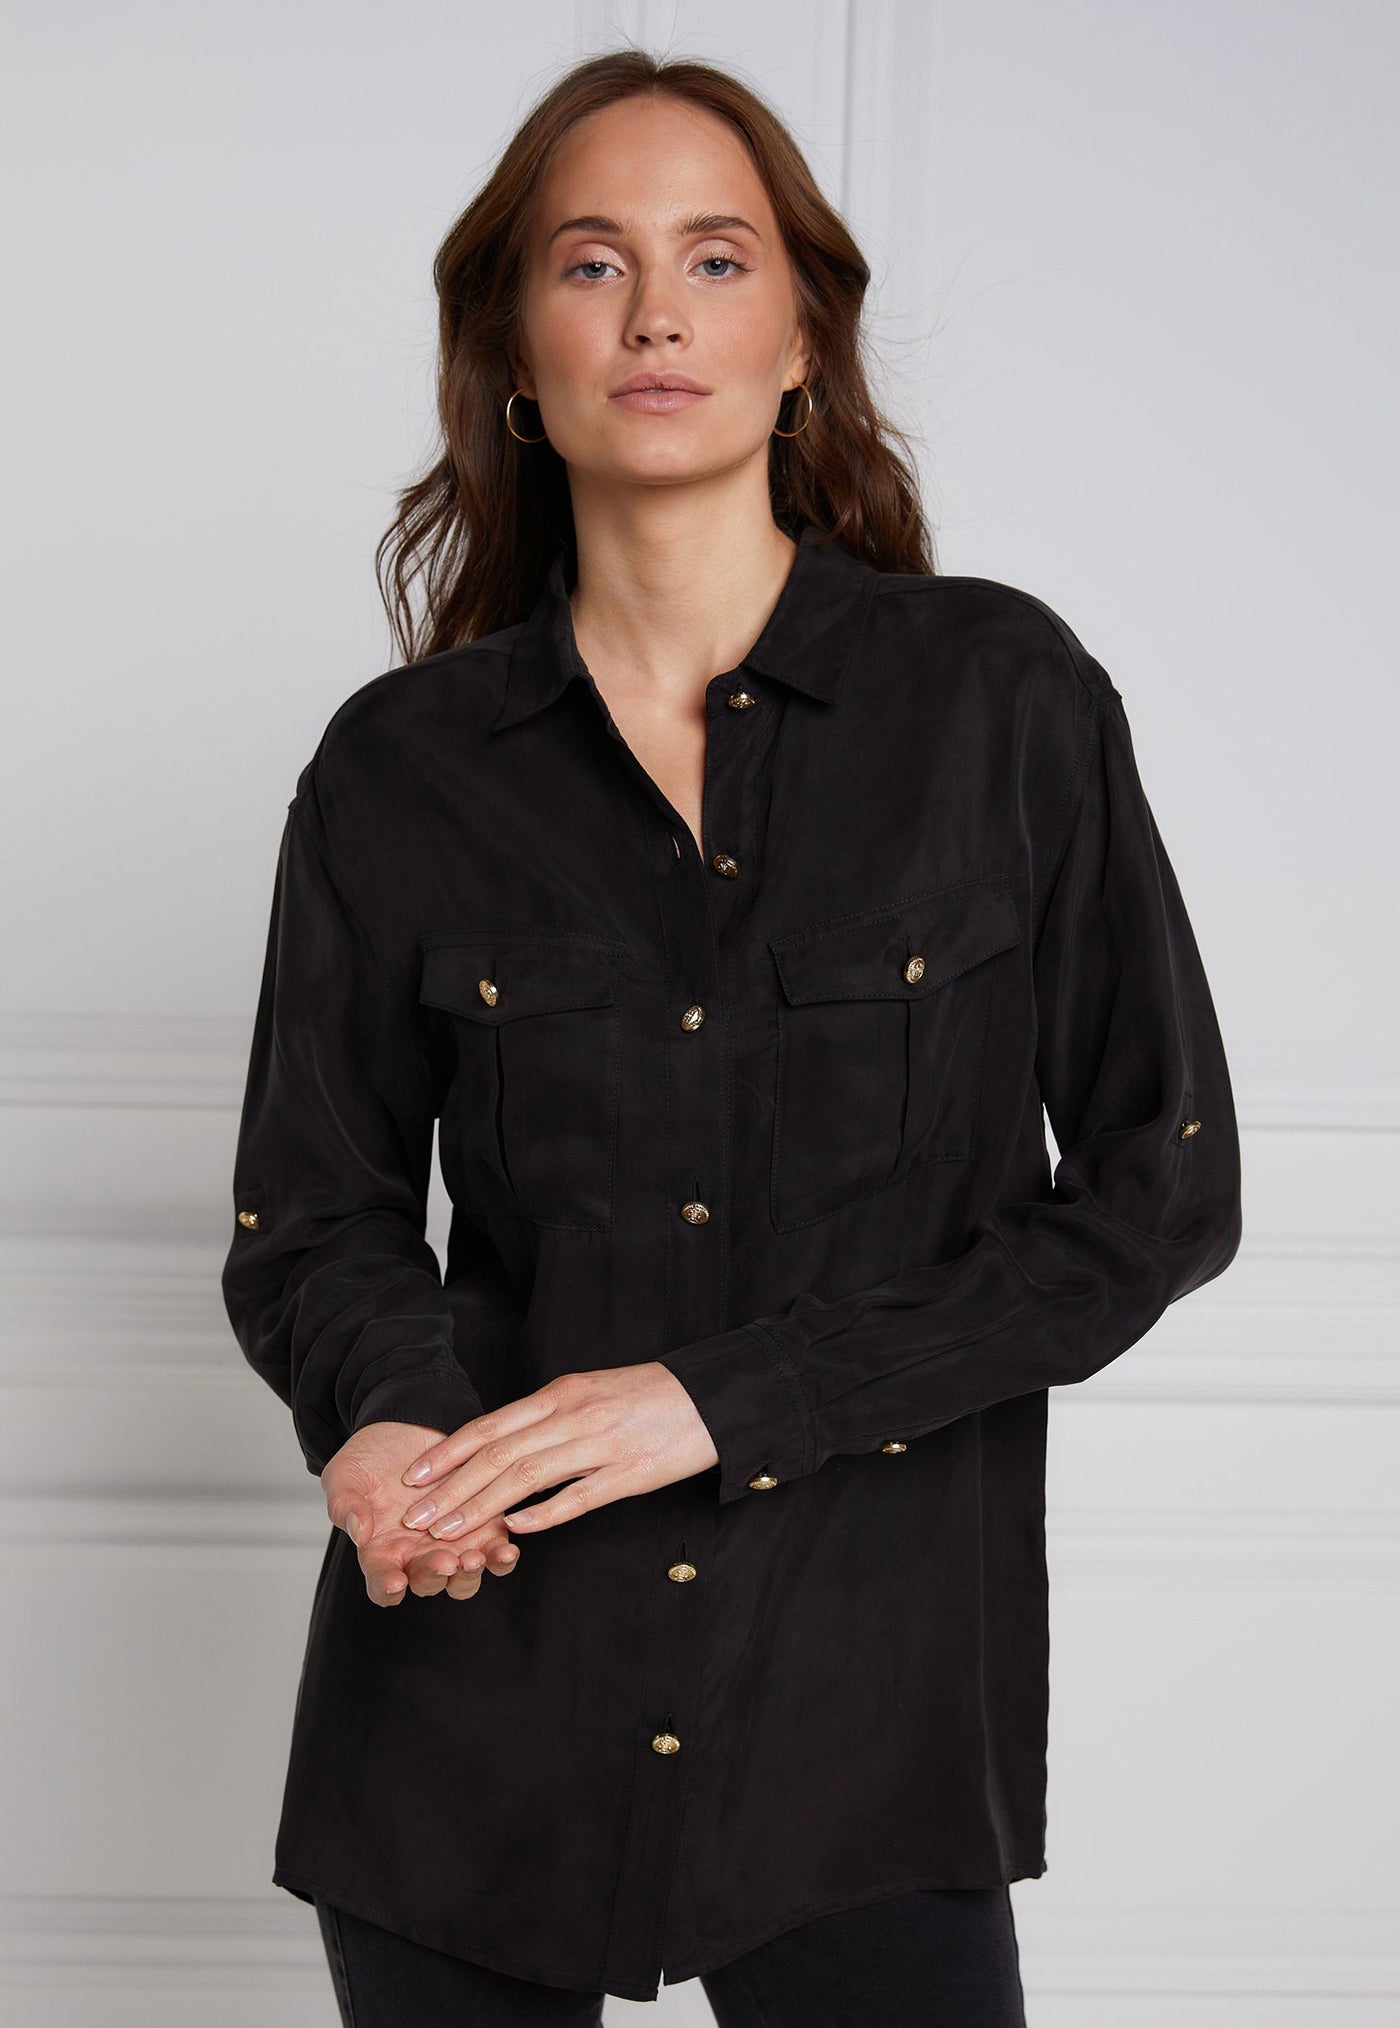 Relaxed Fit Military Shirt - Black sold by Angel Divine